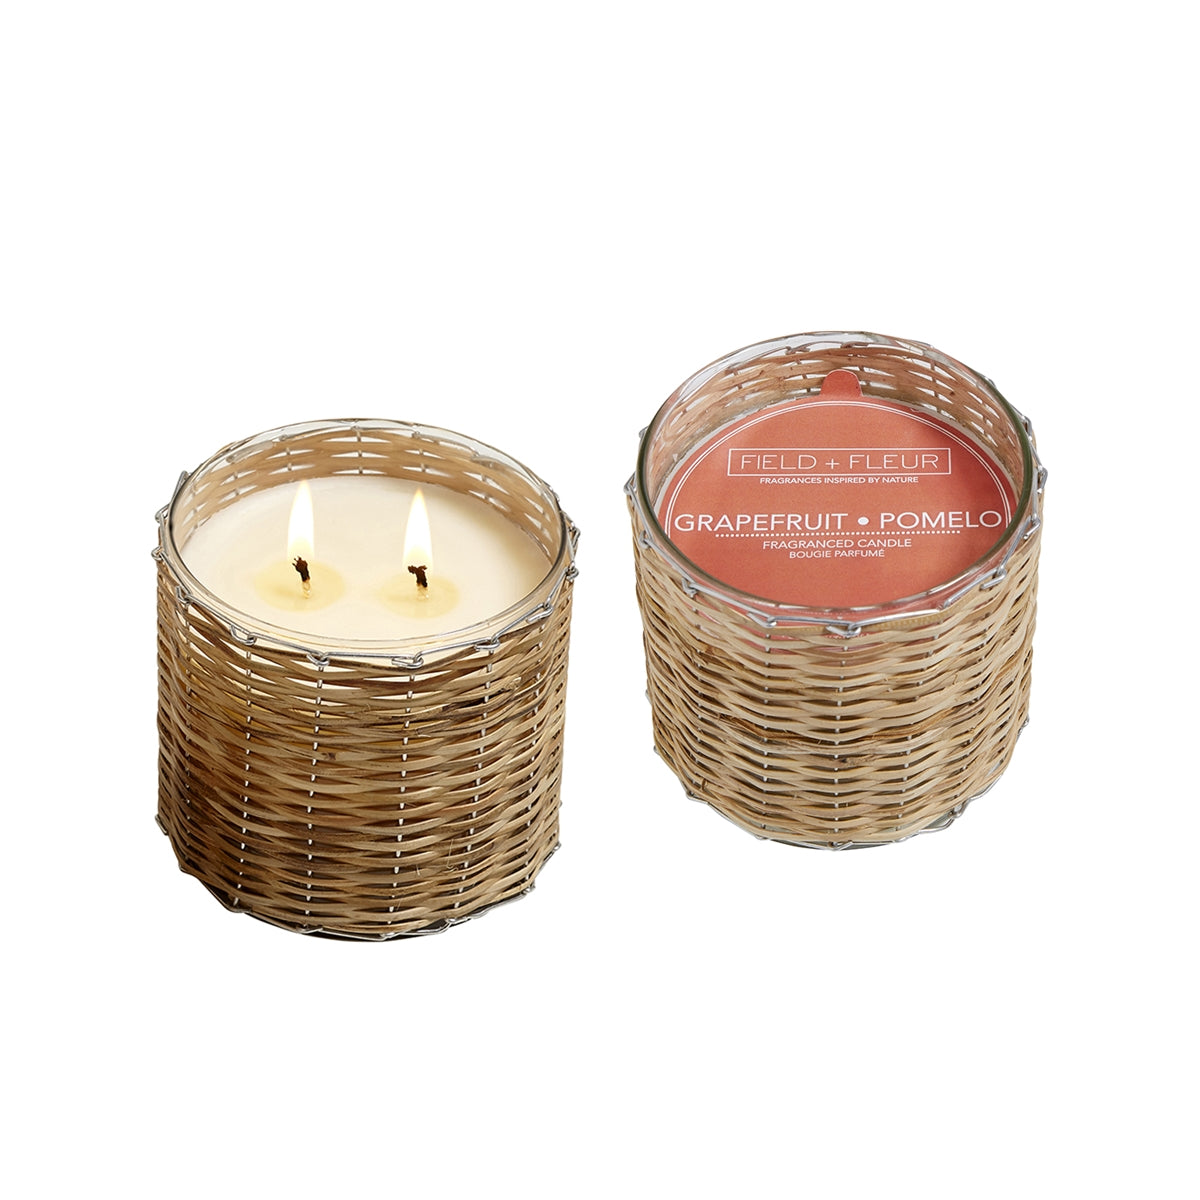 GRAPEFRUIT POMELO Field + Fleur Reed 2-Wick Handwoven 12 oz Scented Jar Candle